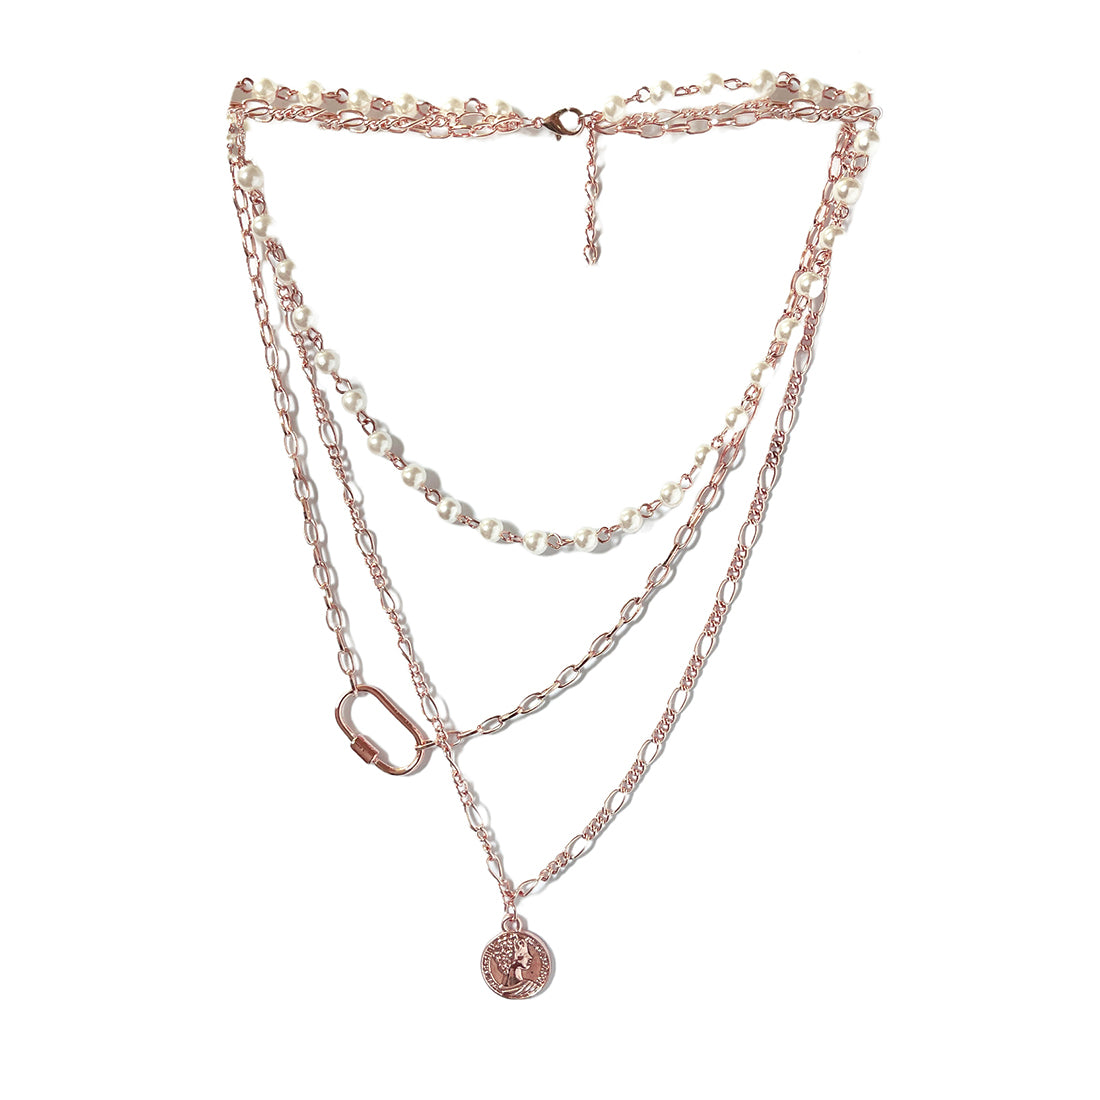 CHUNKY COIN PENDANT PEARL STUDDED CHAIN LINK ROSE GOLD-TONED LAYERED NECKLACE